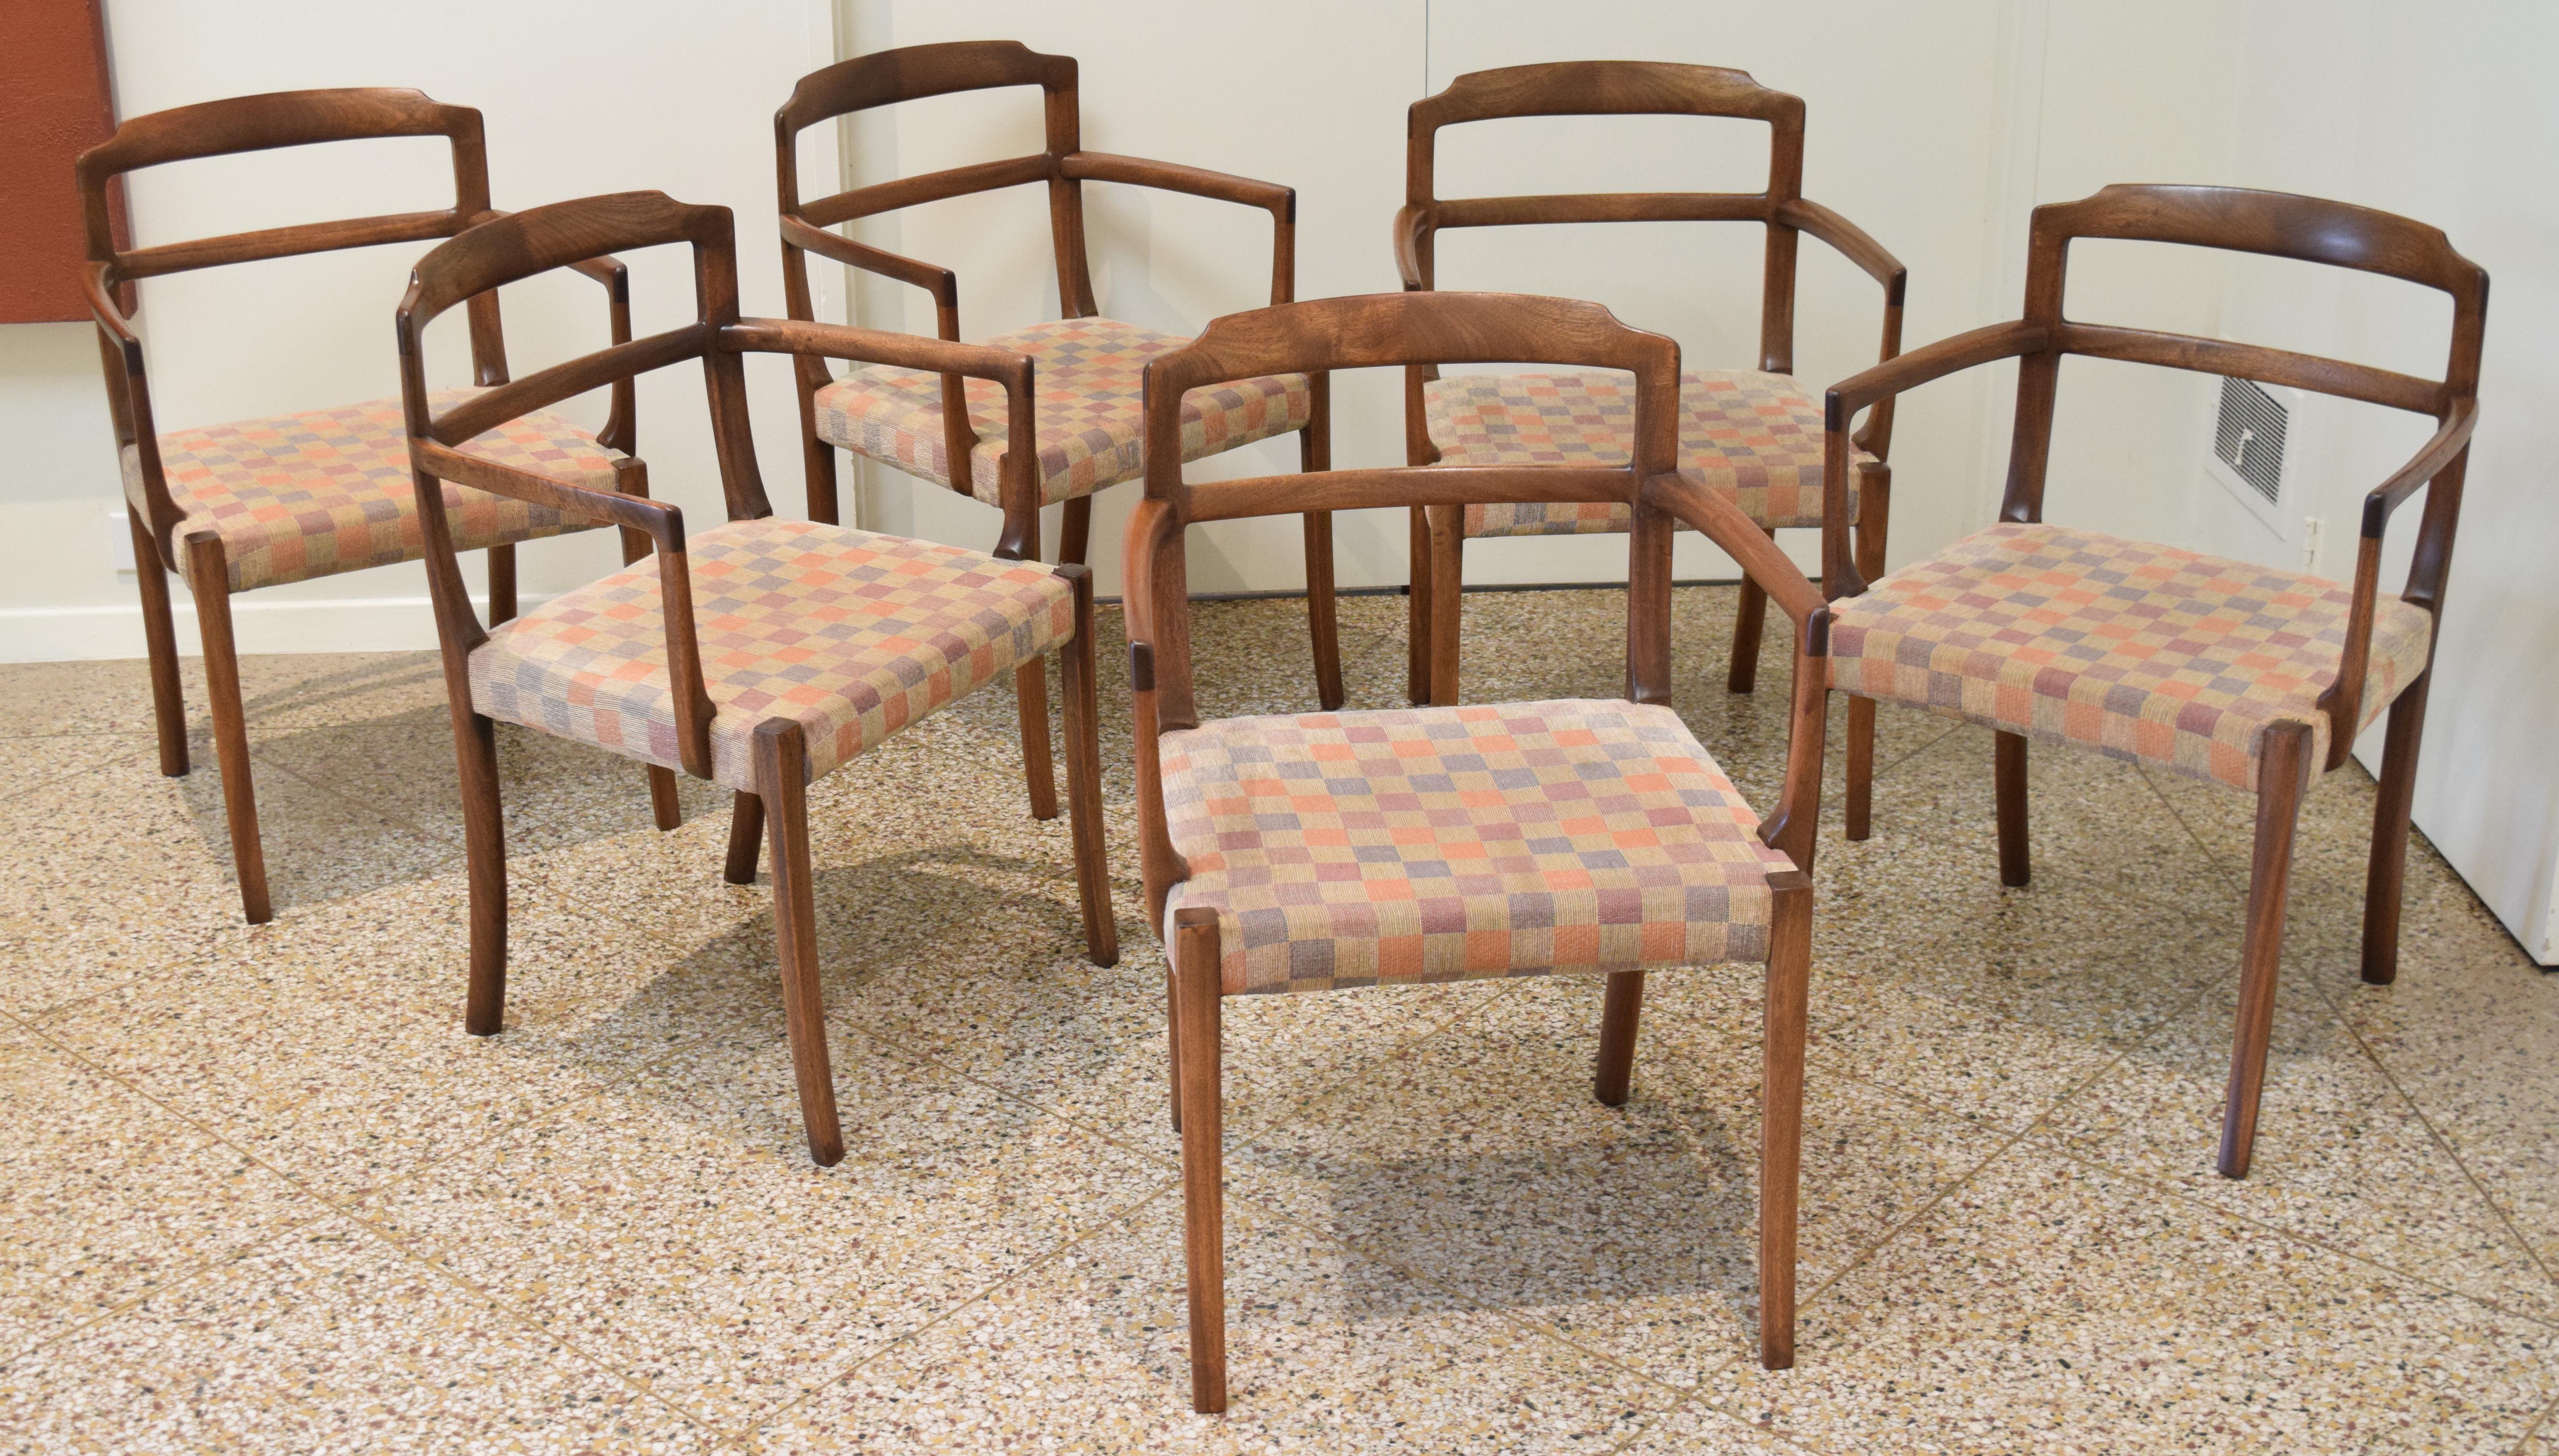 Store closing-- last day is 7/31. Offers welcome! Splendid all-armchair set by celebrated designer Ole Wanscher for master cabinetmaker A. J. Iversen. Created with an artist's eye for form and balance and executed with the finest craftsmanship,